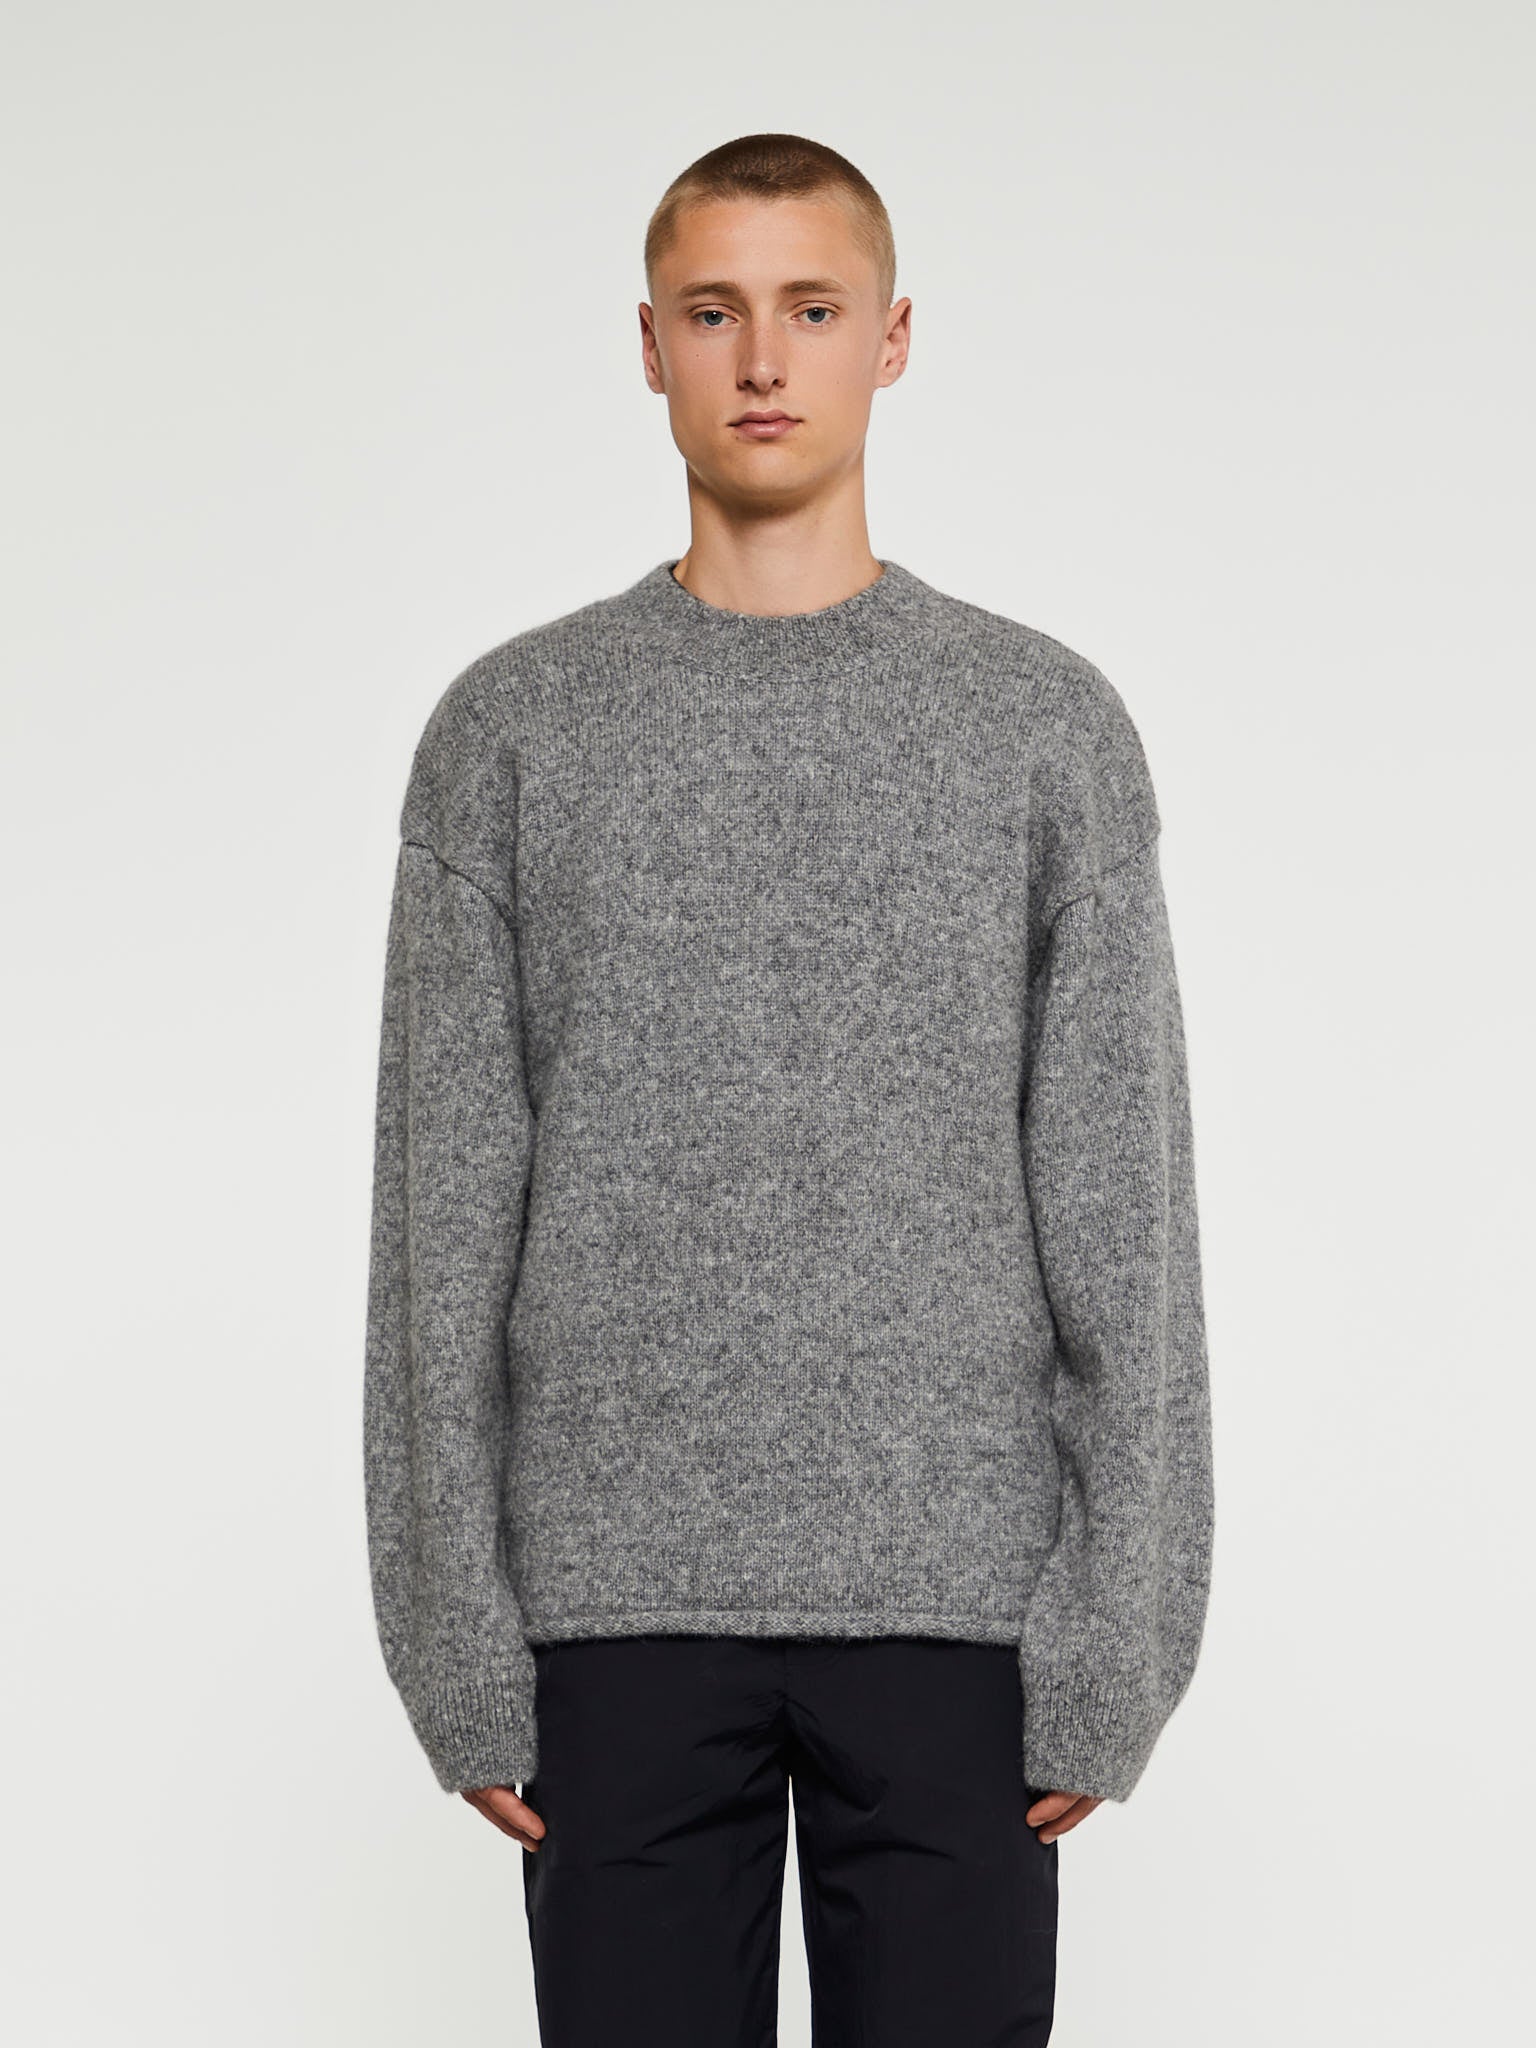 Le Pull Jacquemus in Grey